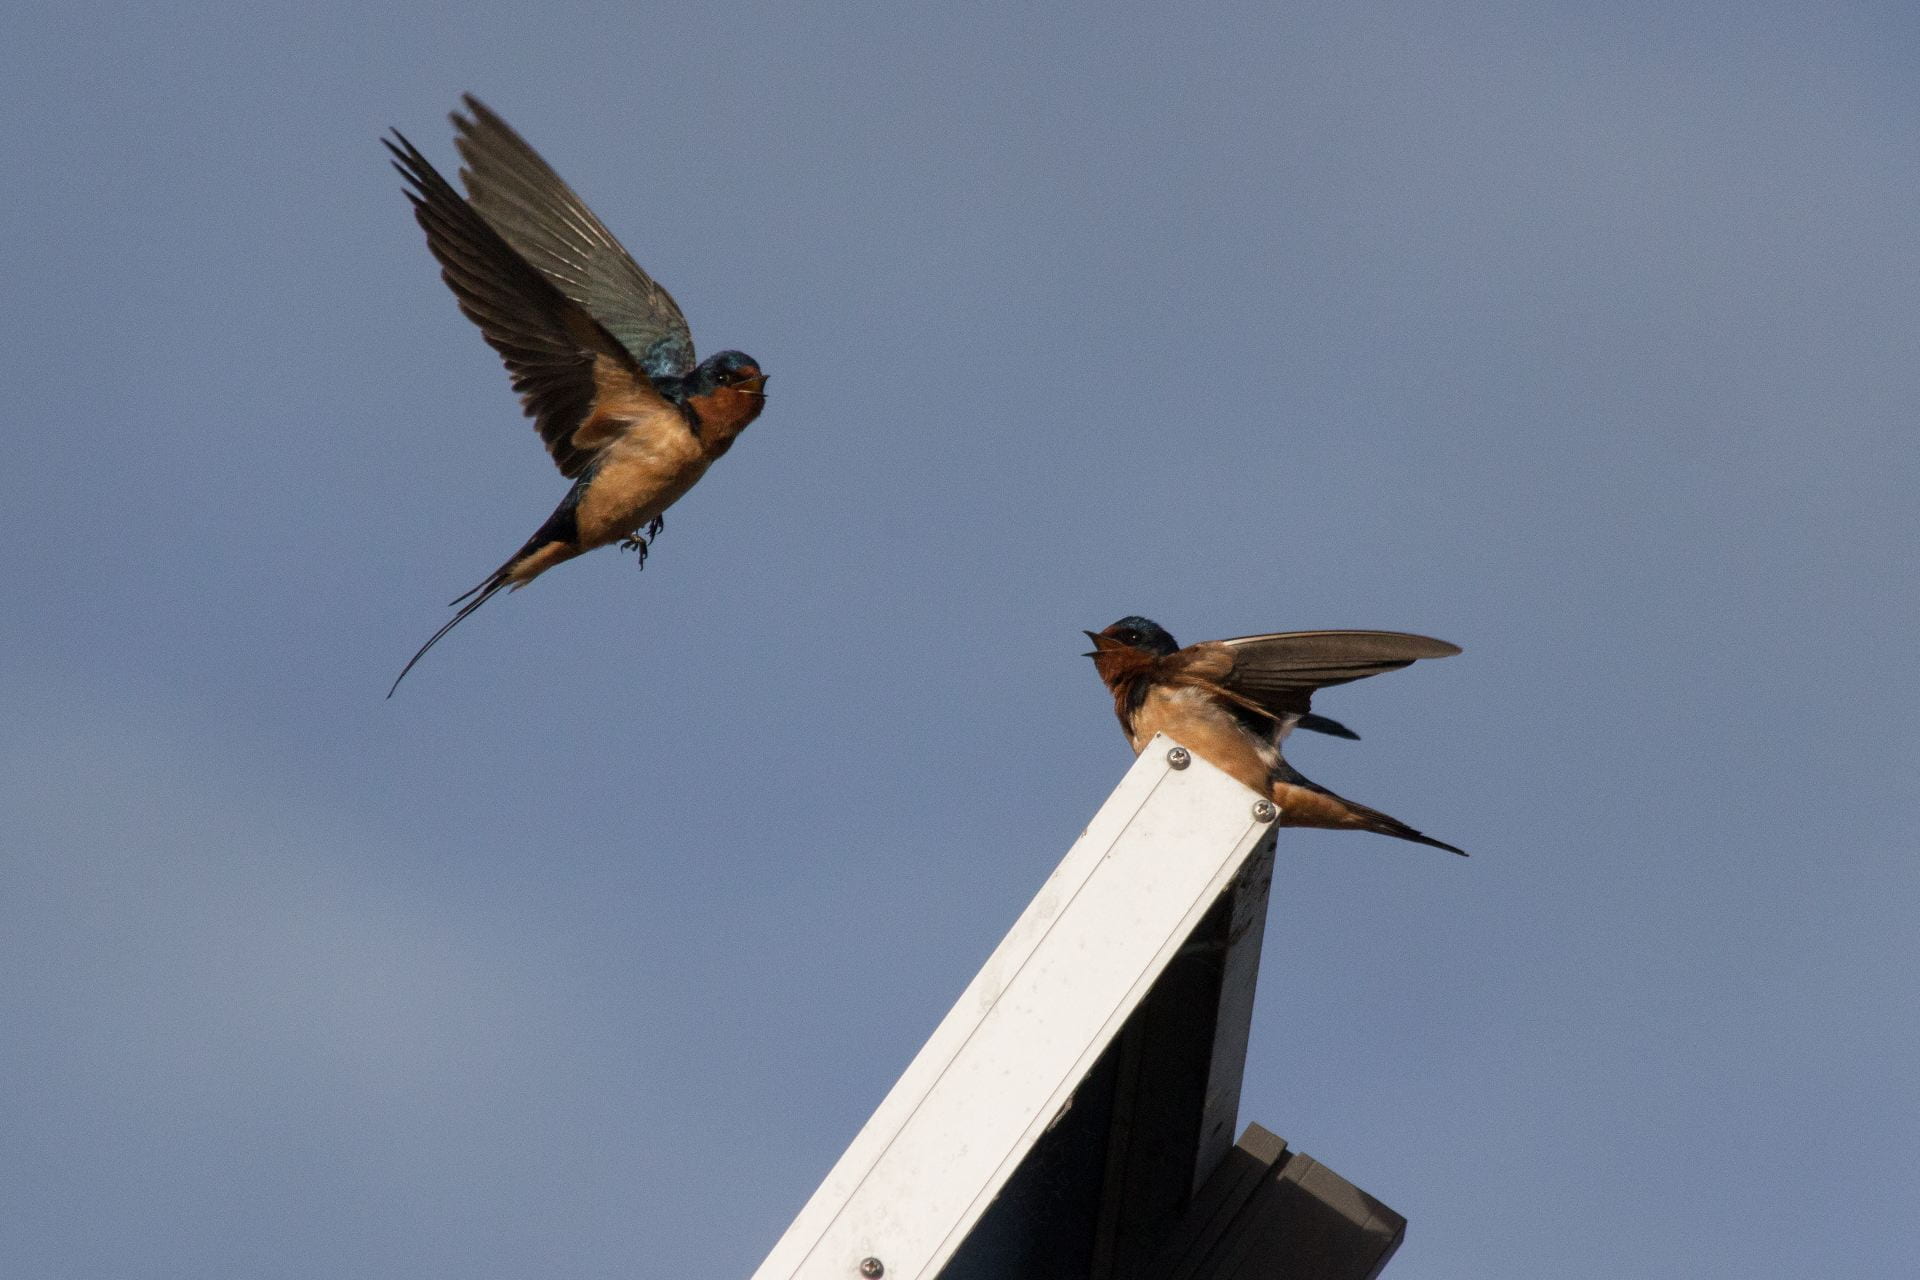 One barn swallow sits on a solar panel; another flies in. Credit: Don McCullough, Wikimedia Commons, CC 2.0, https://commons.wikimedia.org/wiki/File:Squabble_-_Flickr_-_Don_McCullough.jpg